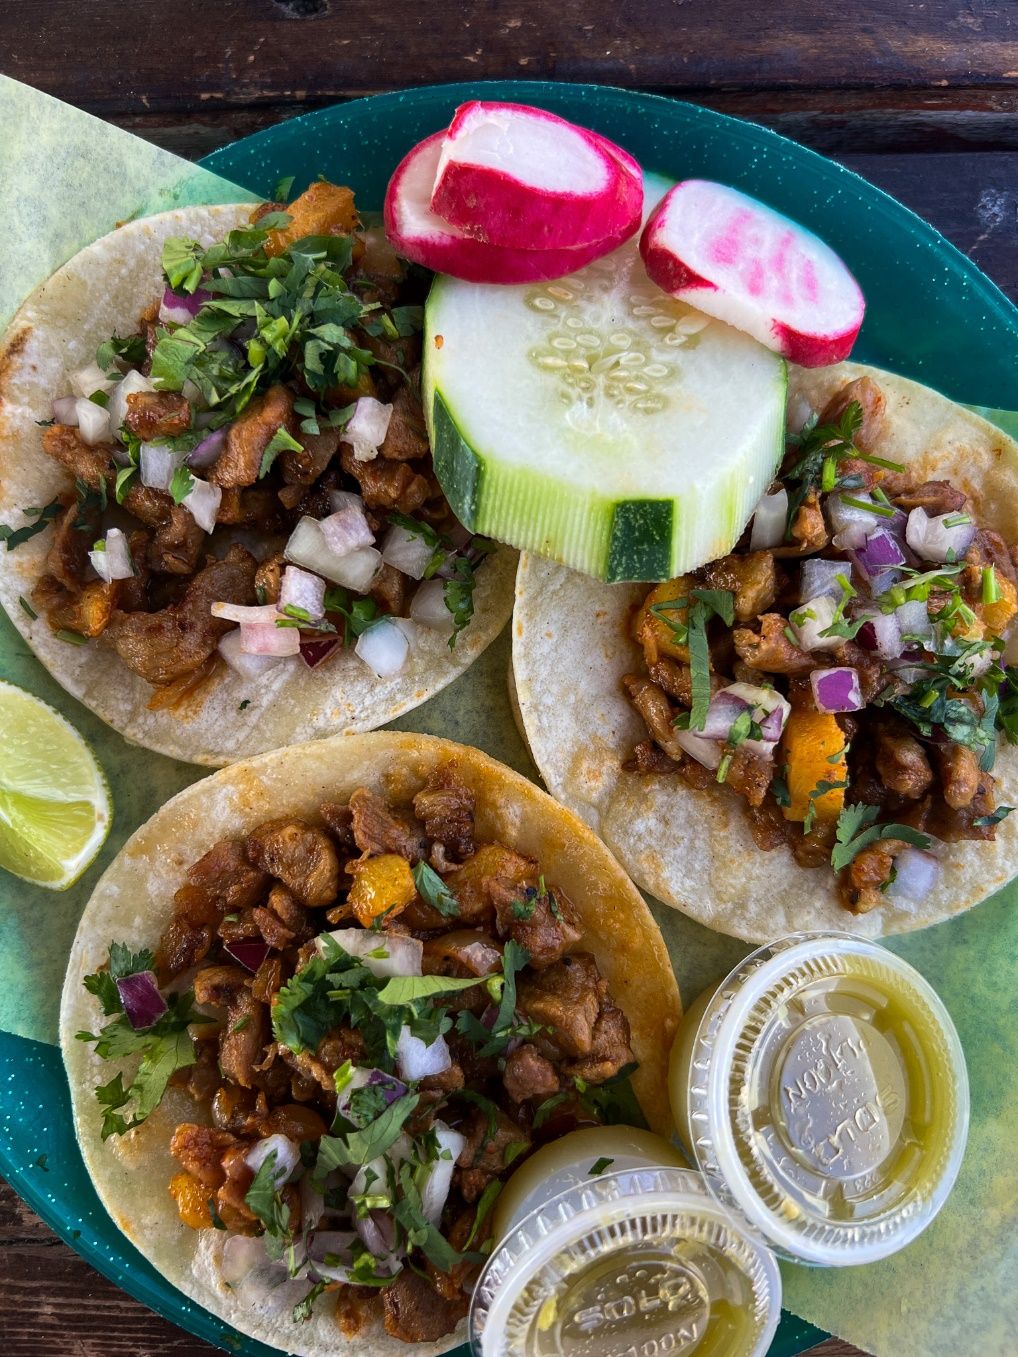 A plate of tacos with vegetables and sauce Description automatically generated